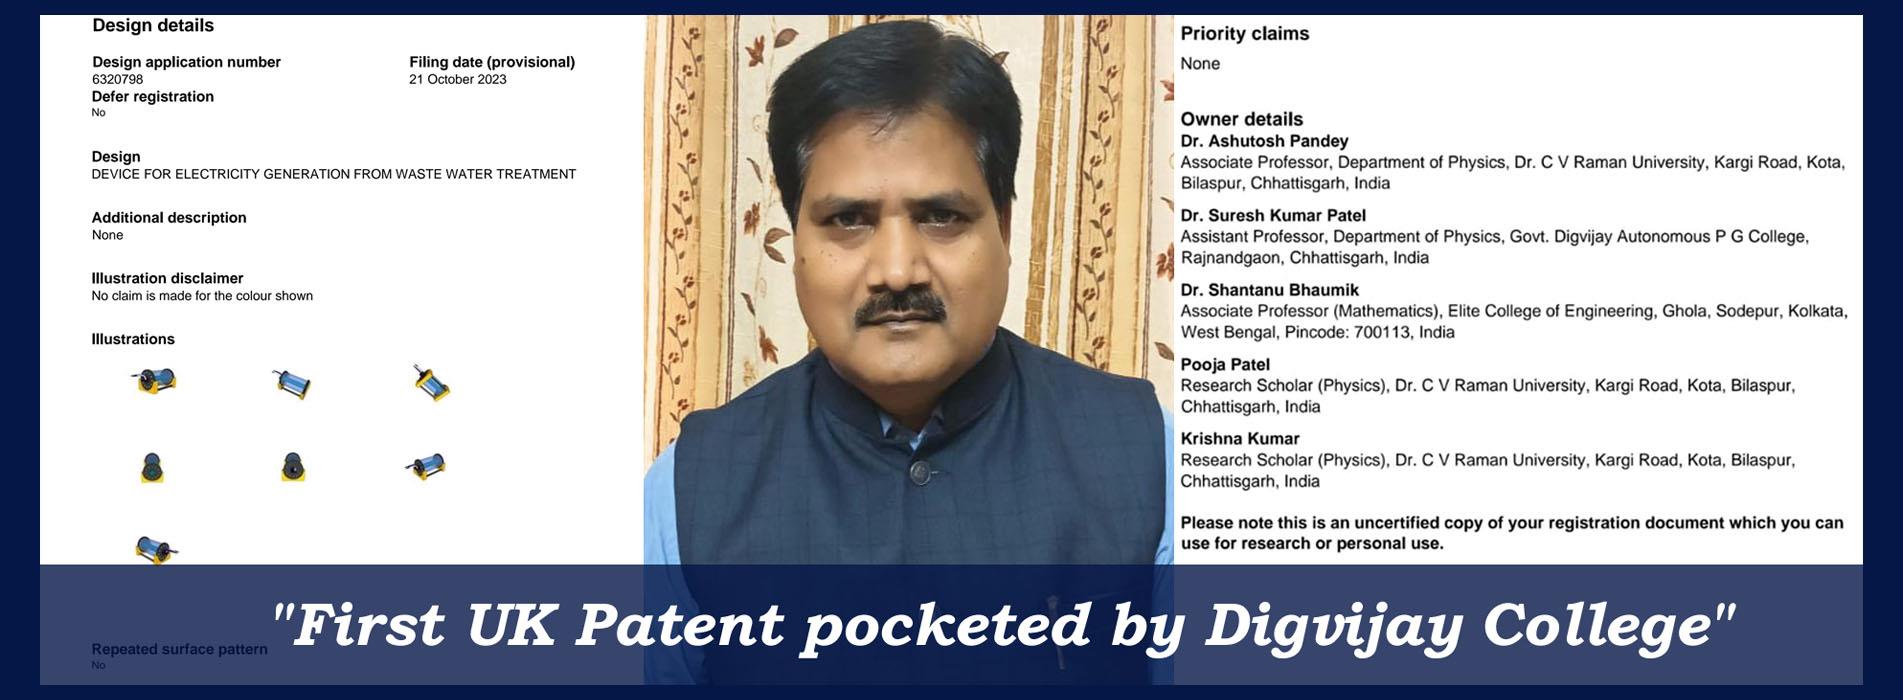 First UK Patent pocketed by Digvijay College